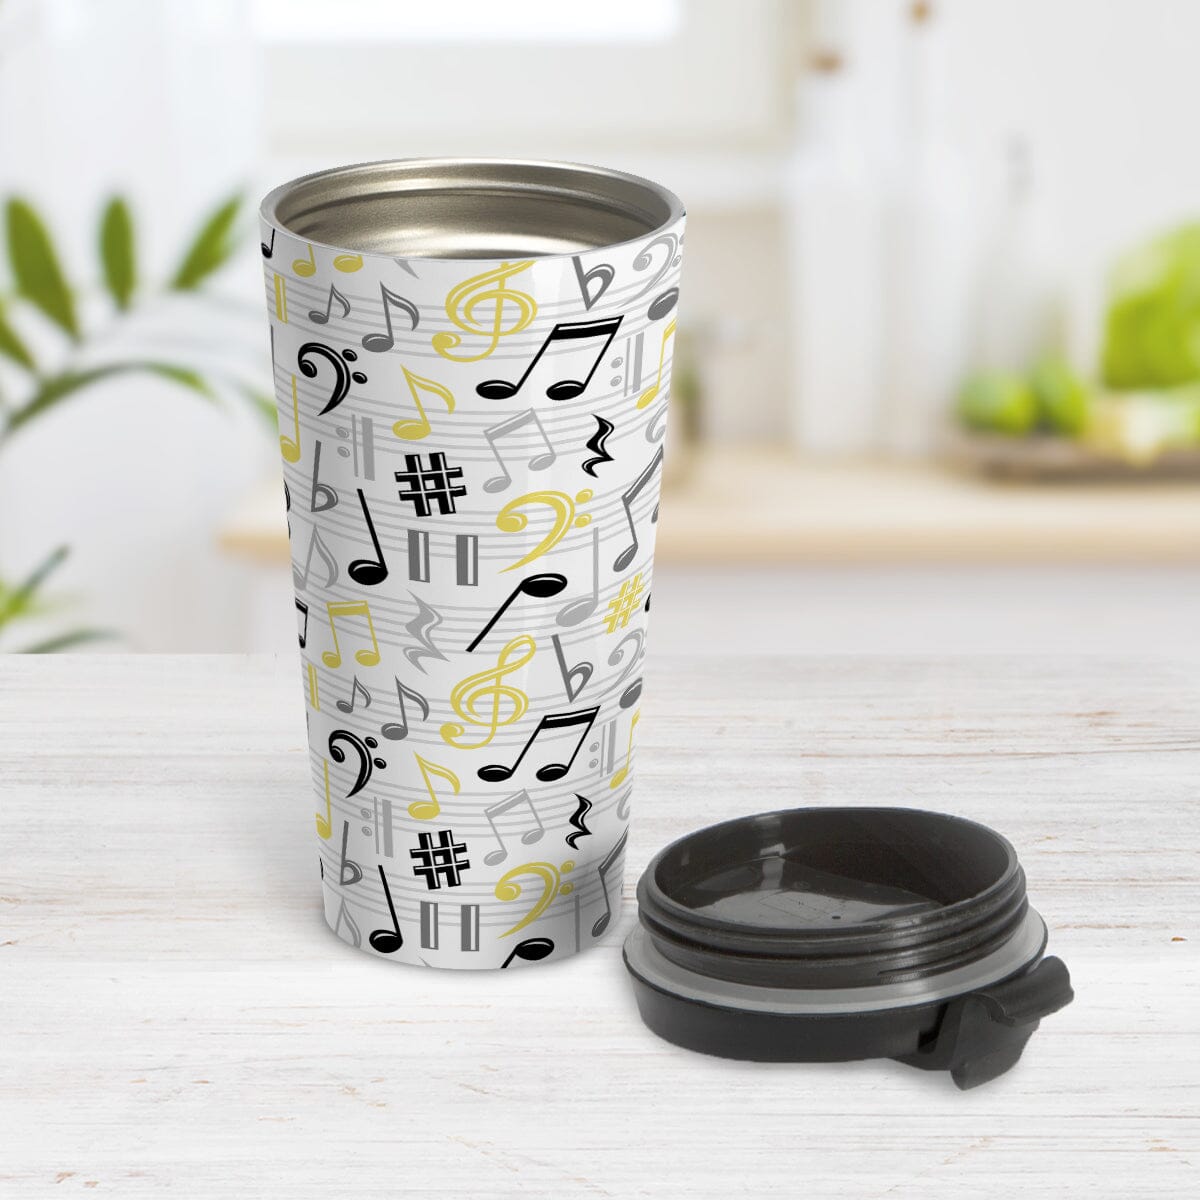 Yellow Music Notes Pattern Travel Mug (15oz) at Amy's Coffee Mugs. A stainless steel travel mug designed with music notes and symbols in yellow, black, and gray in a pattern that wraps around the travel mug. Image shows the travel mug open with the lid laying beside it on a tabletop.